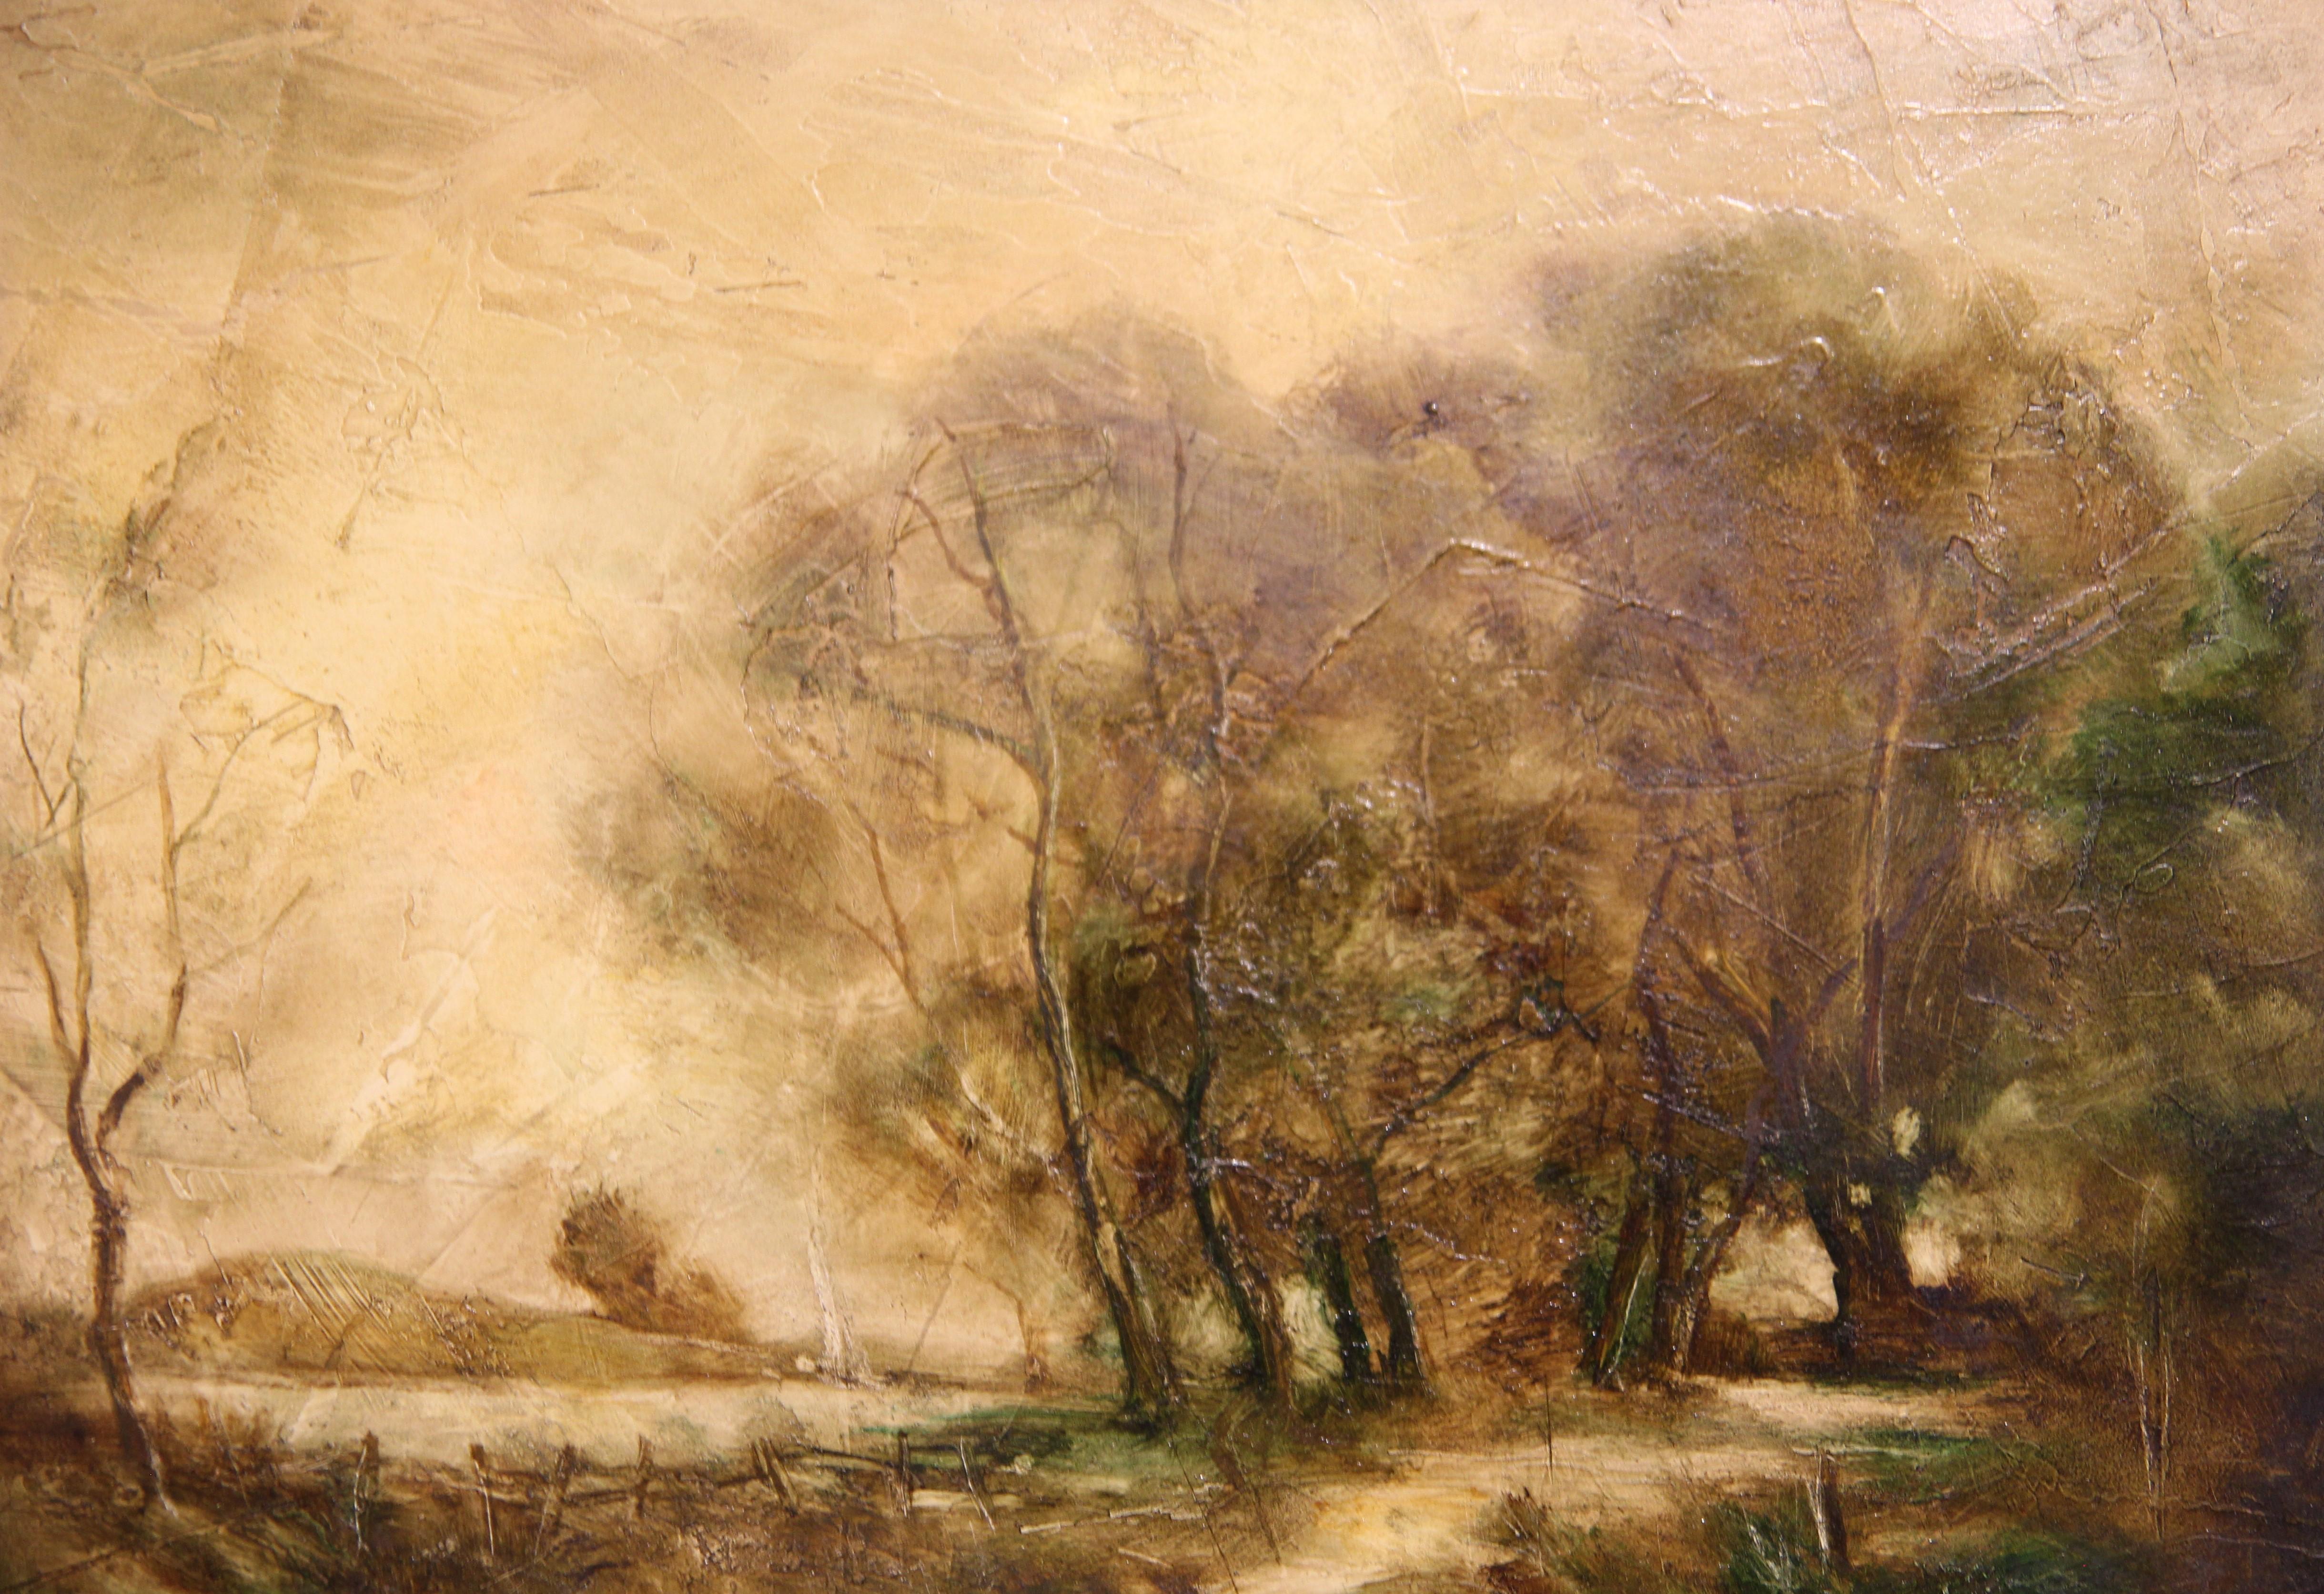 Naturalistic Earth Toned Impressionist Farm in Autumn Landscape - Painting by Drexell Caraway McNay